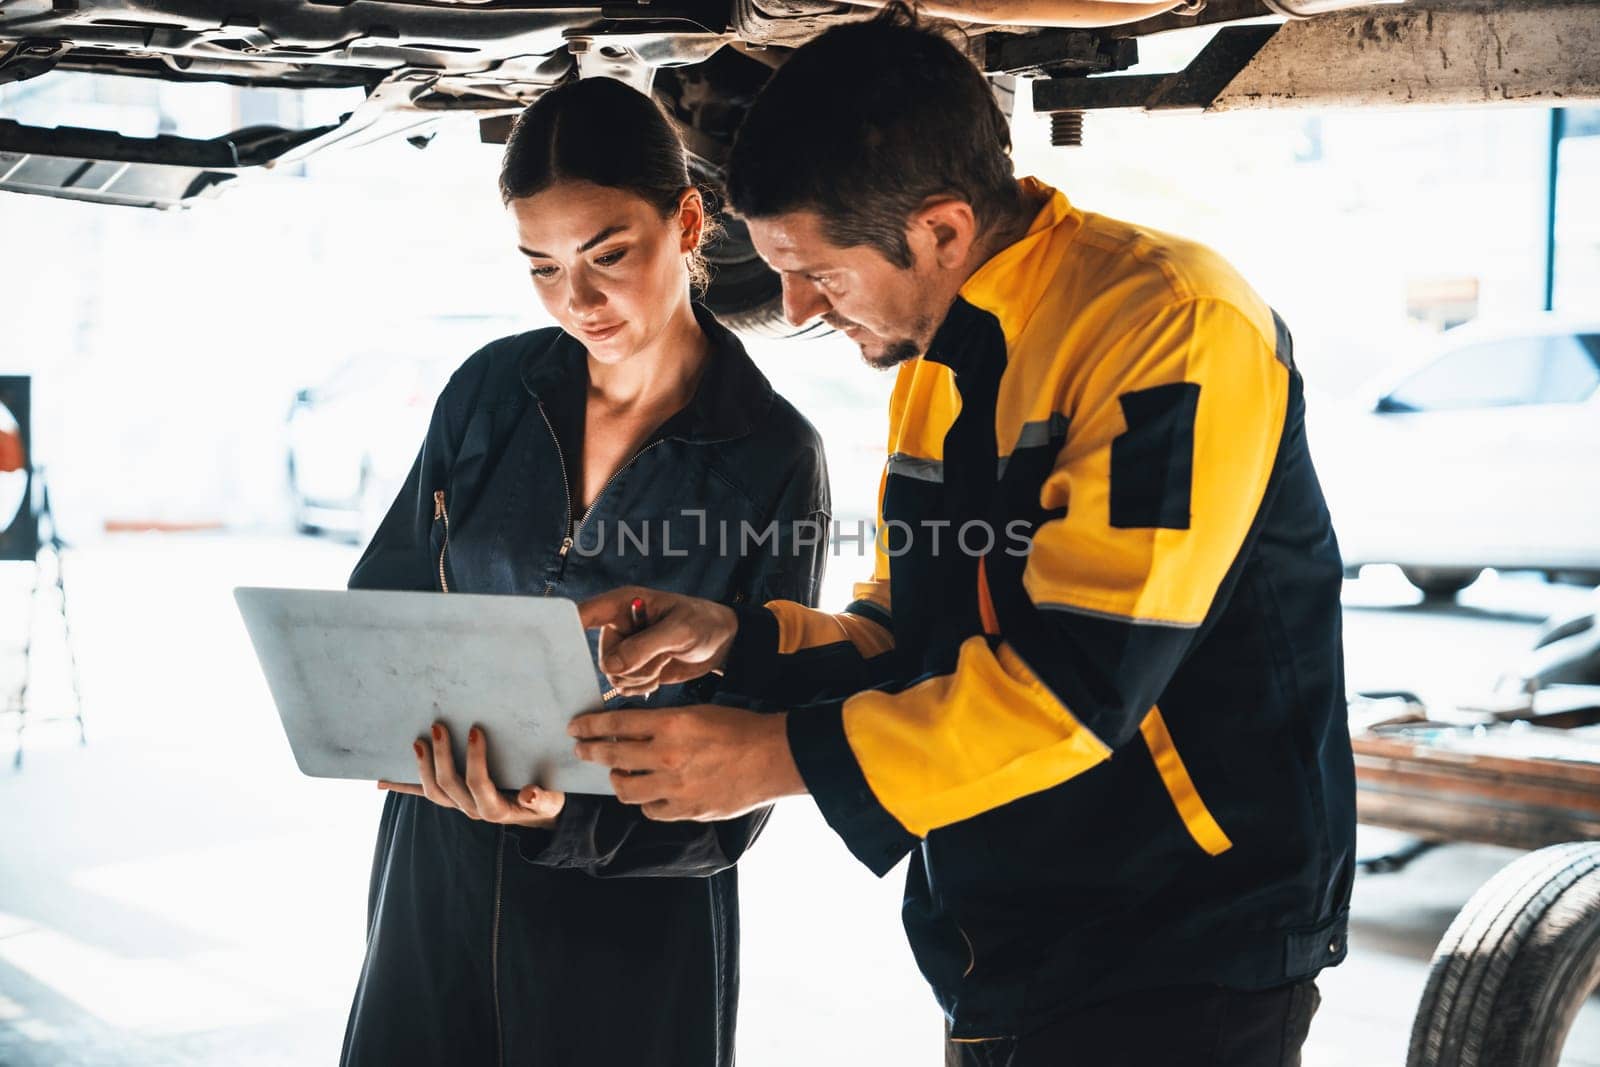 Two vehicle mechanic working together underneath lifted car, conduct car inspection with laptop. Automotive service technician in uniform carefully make diagnostic troubleshooting. Oxus